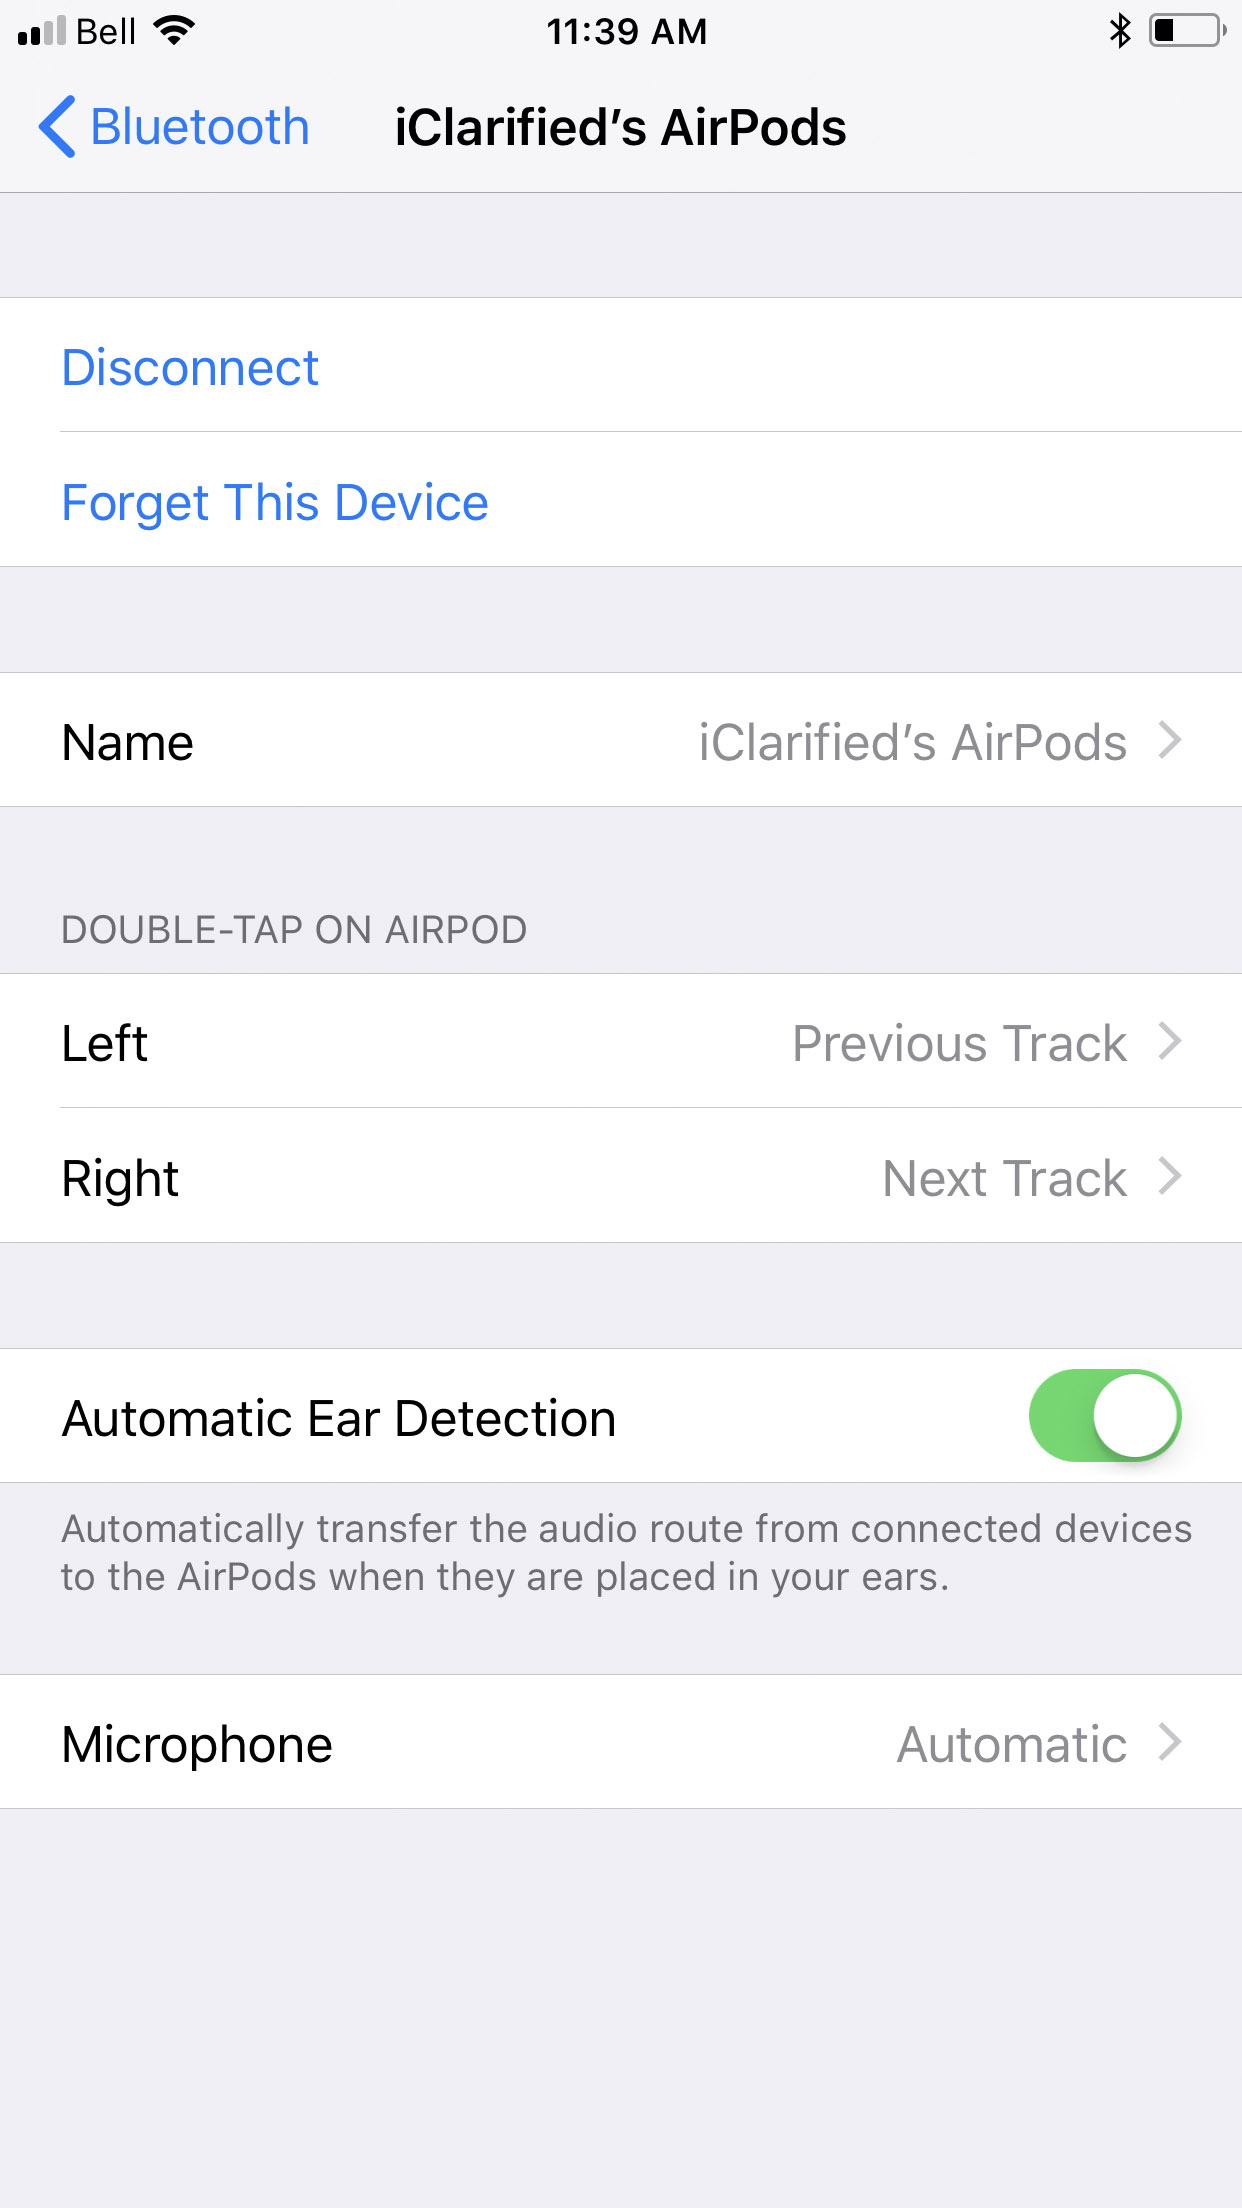 How to Skip to the Next/Previous Track and Play/Pause Using Your AirPods [Video]